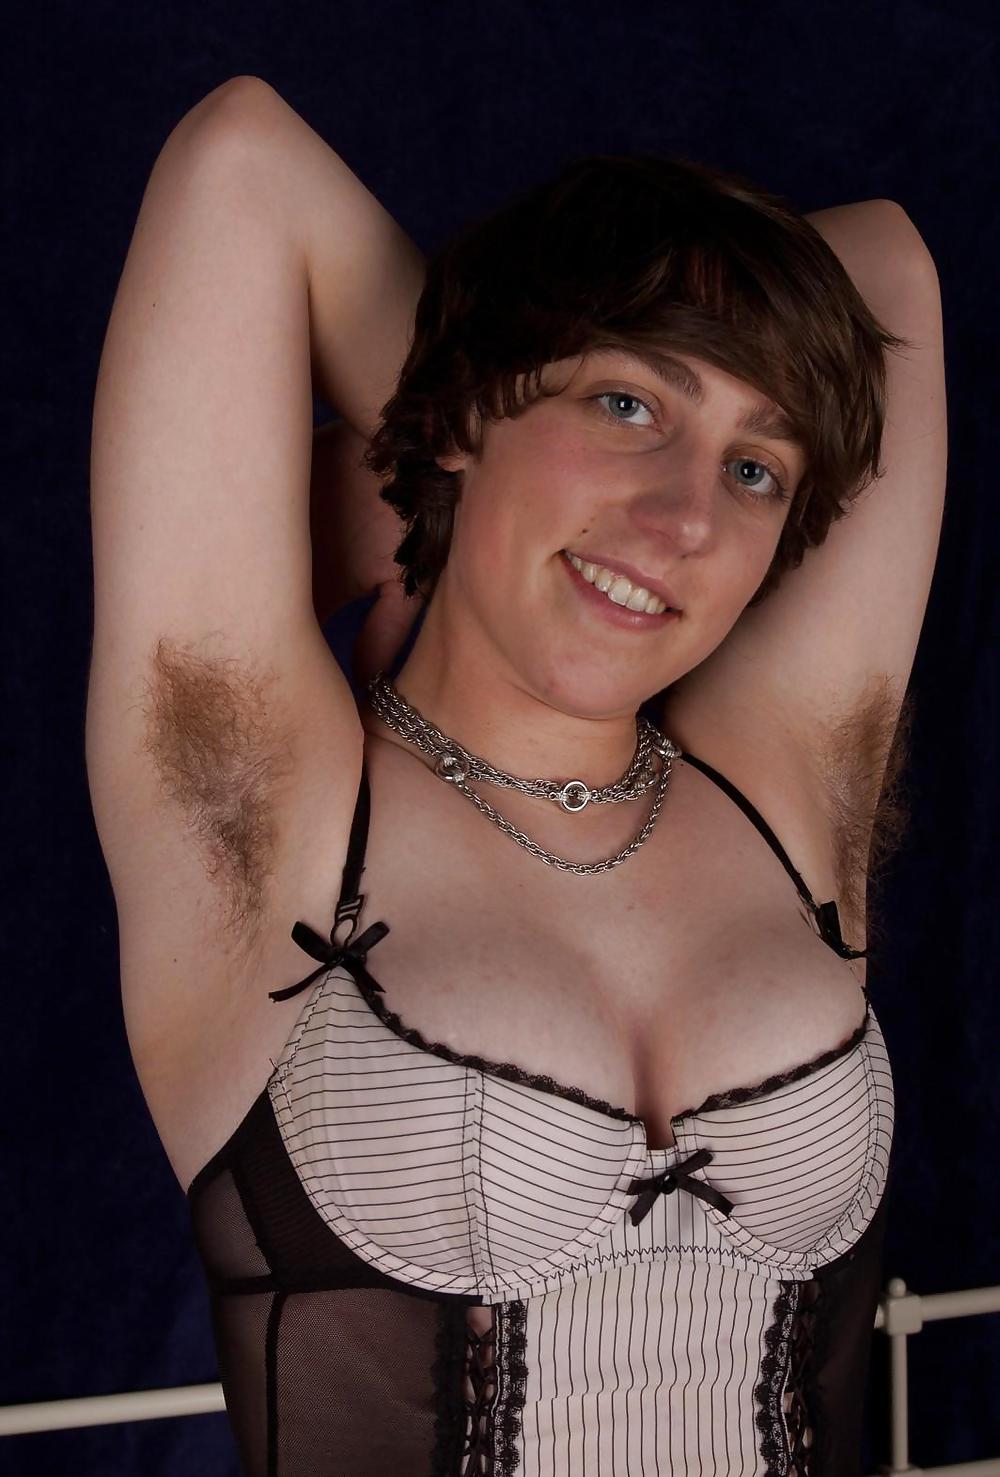 Girls with hairy, unshaven armpits C #23732049